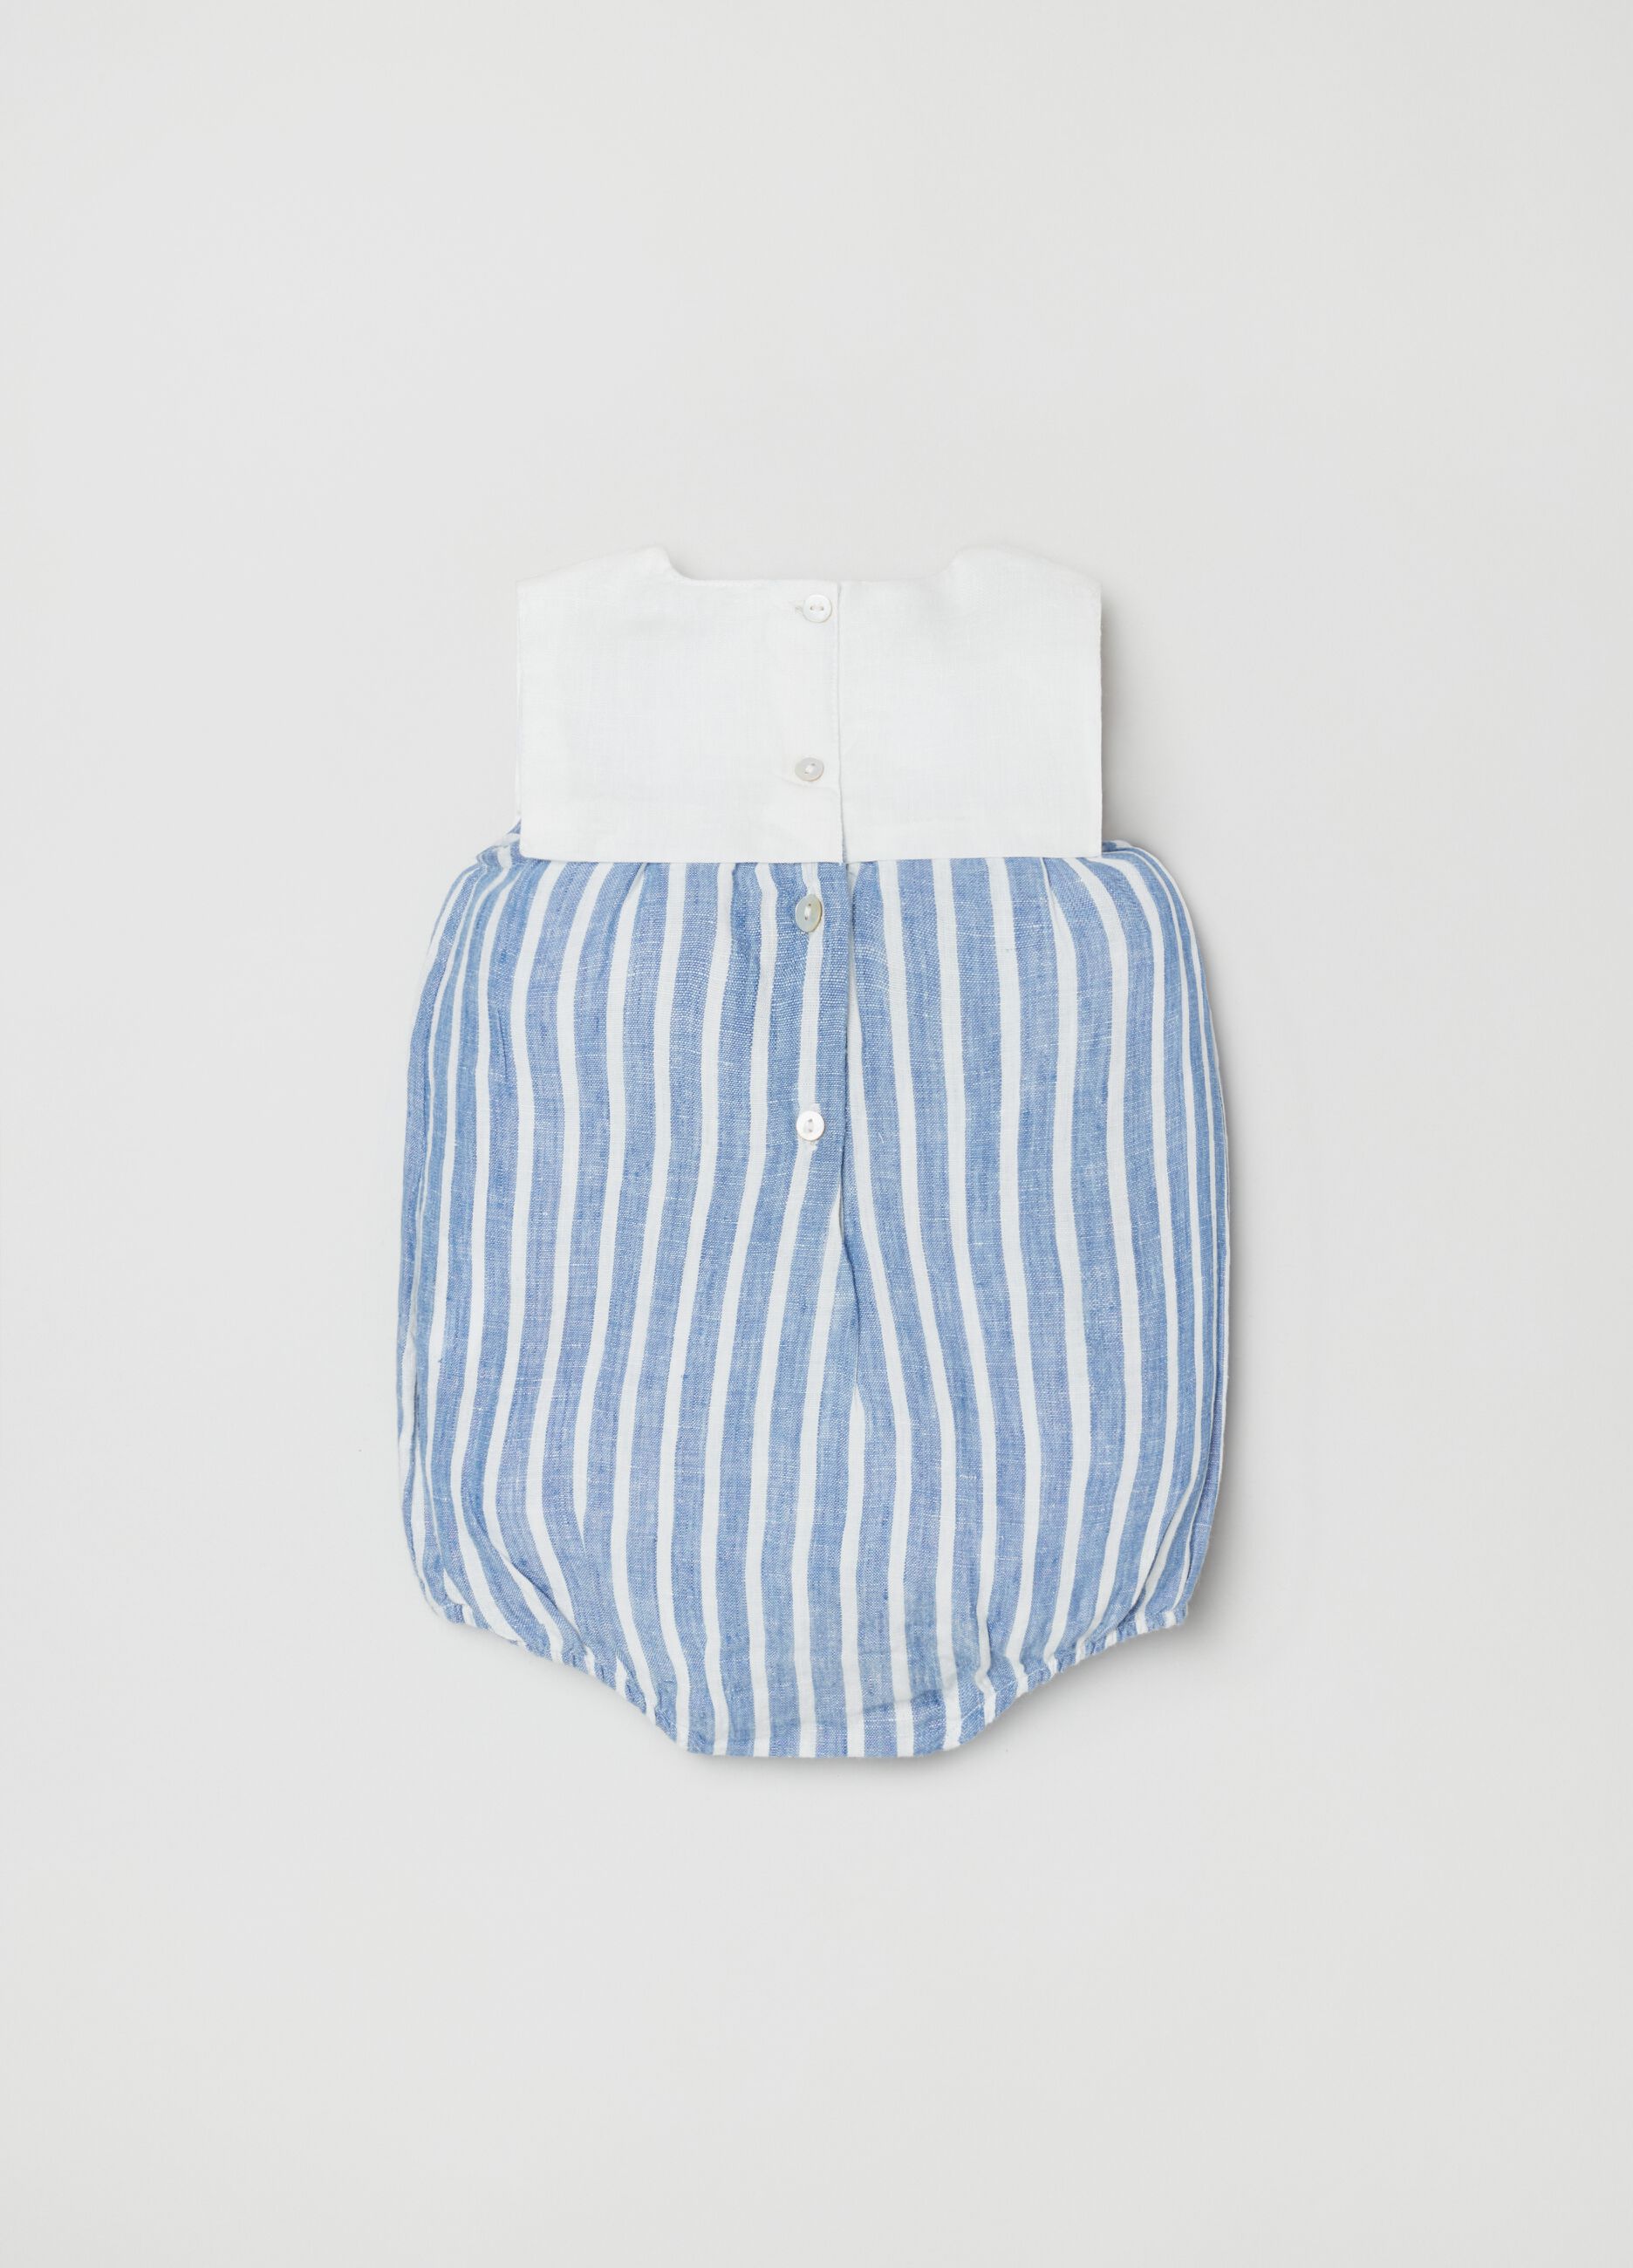 Playsuit in linen with striped pattern